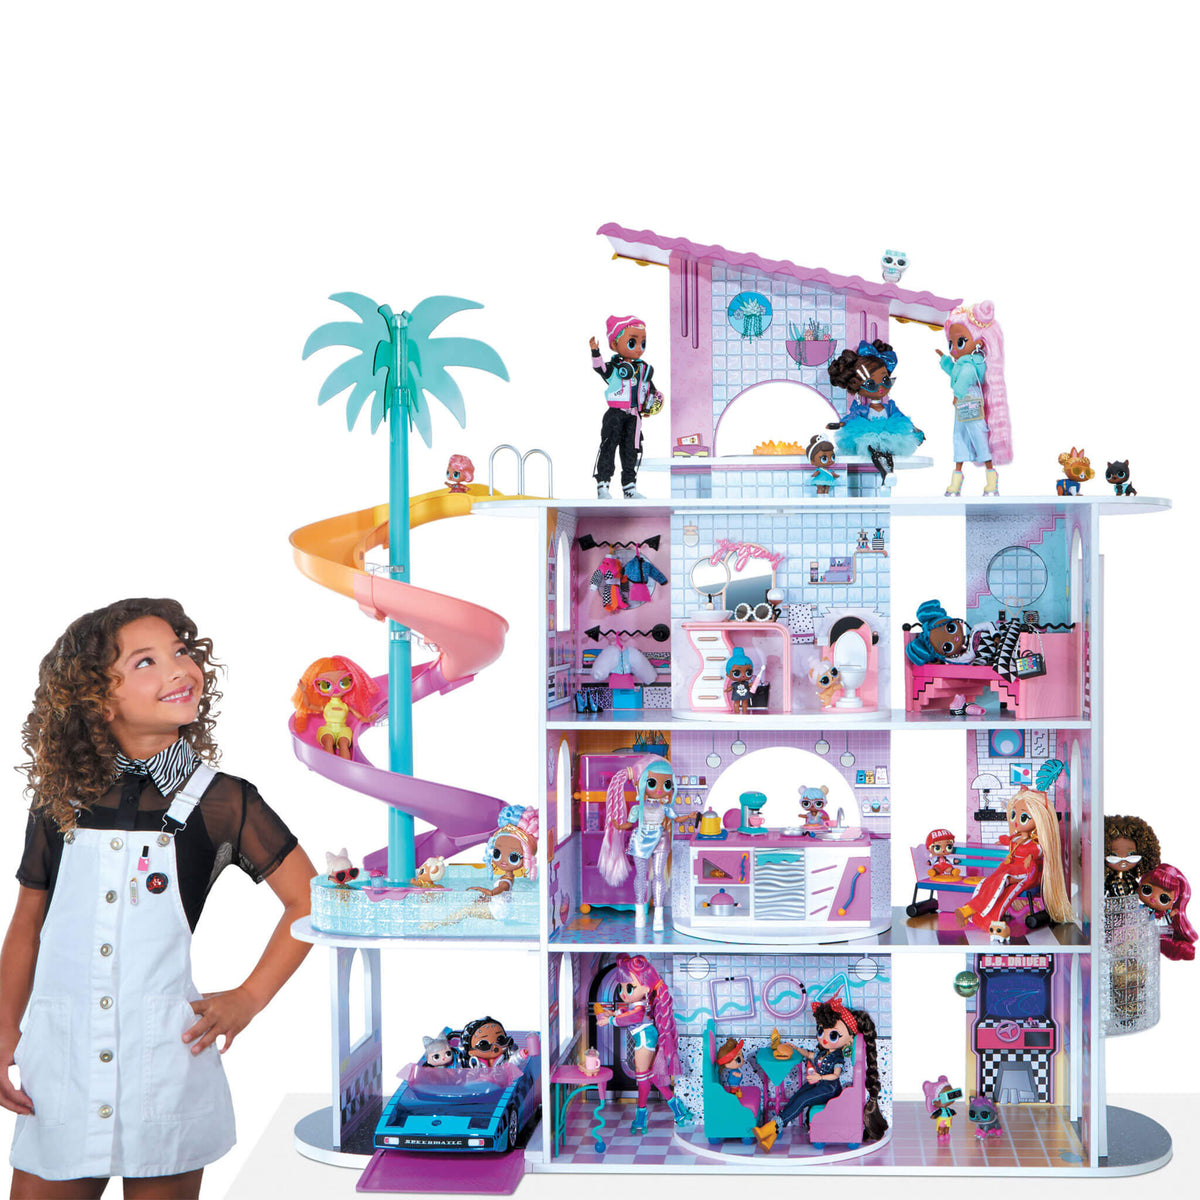 LOL Surprise OMG House of Surprises – New Real Wood Doll House with 85